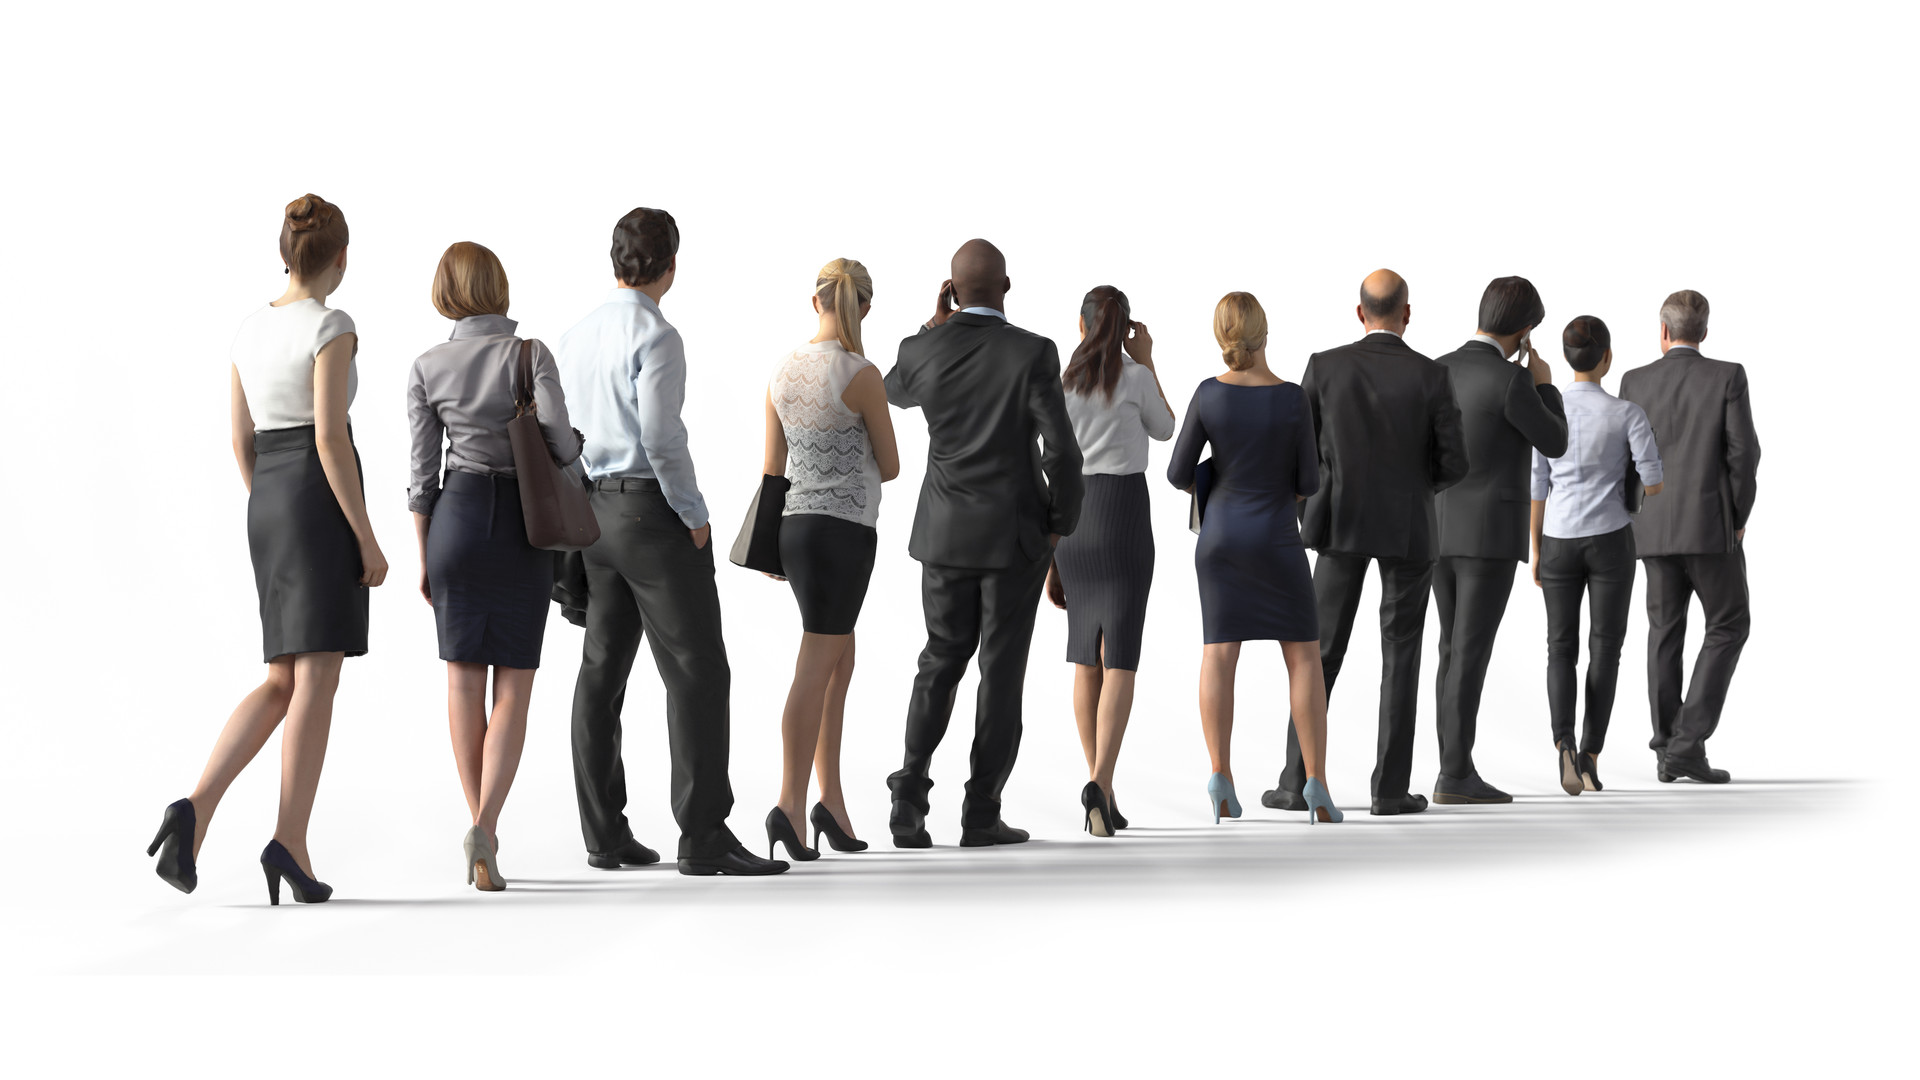 Back view of standing business people. Illustration on white background, 3d rendering isolated.